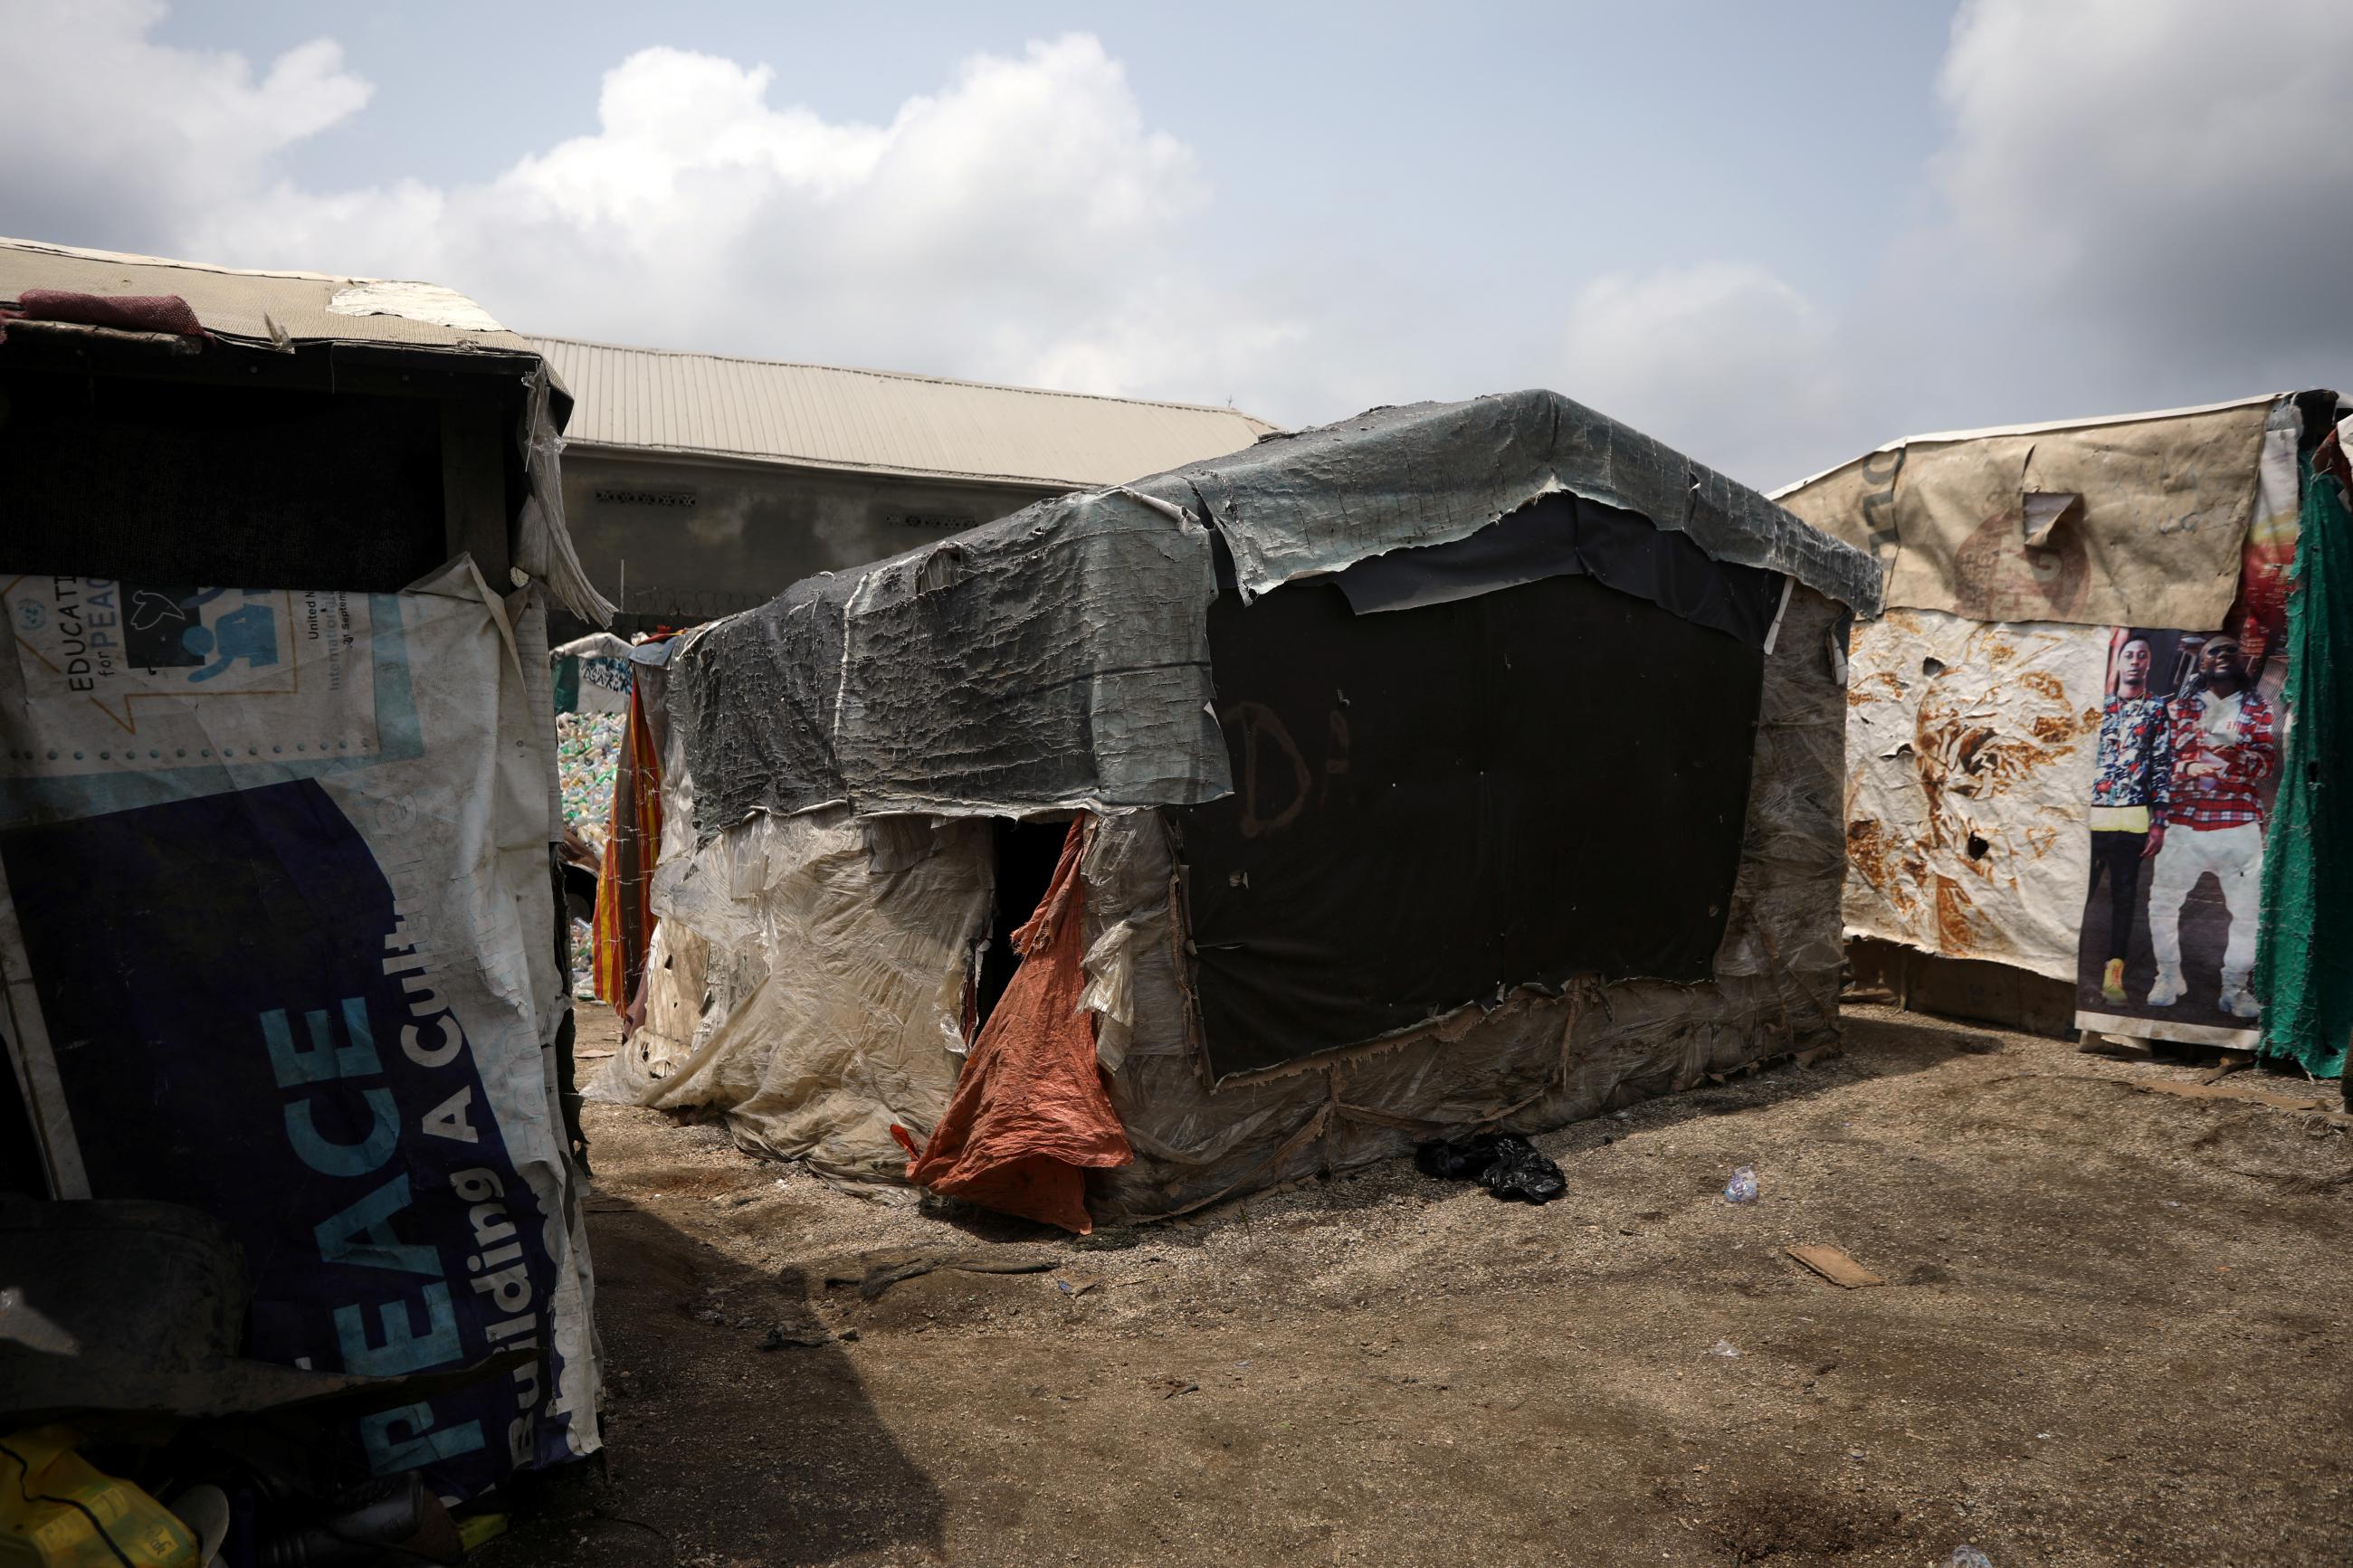 A house with plastic covering is seen in one of the overpopulated settlements in Abuja, Nigeria, on September 23, 2019.